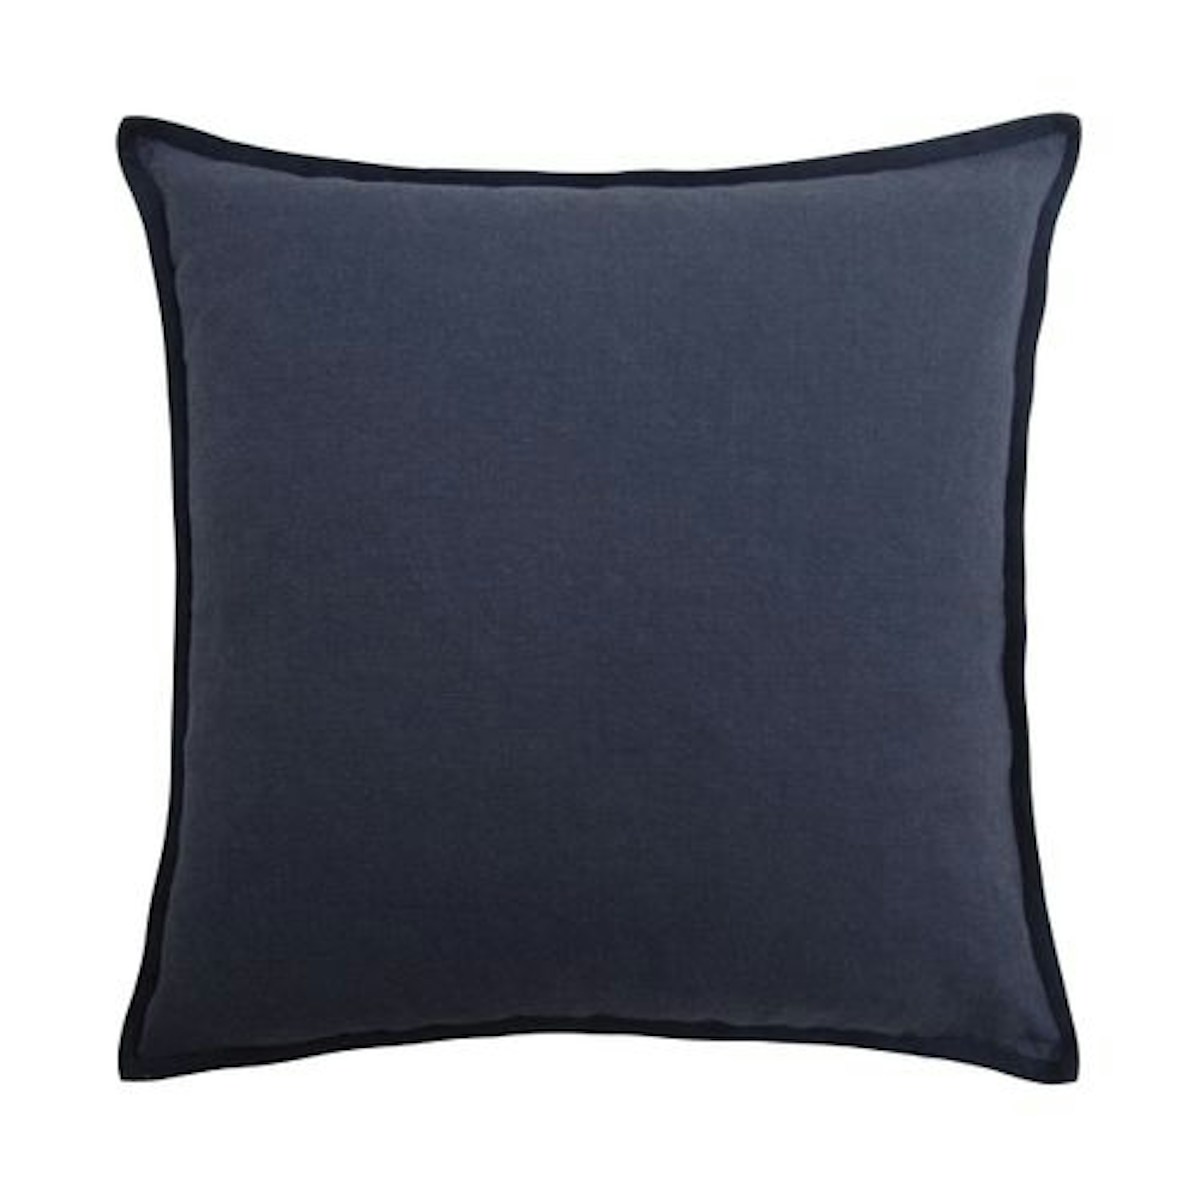 Night Artist Canvas Cushion - 9 Best Luxury Cushions to Buy for your Home - Style Guide - LuxDeco.com